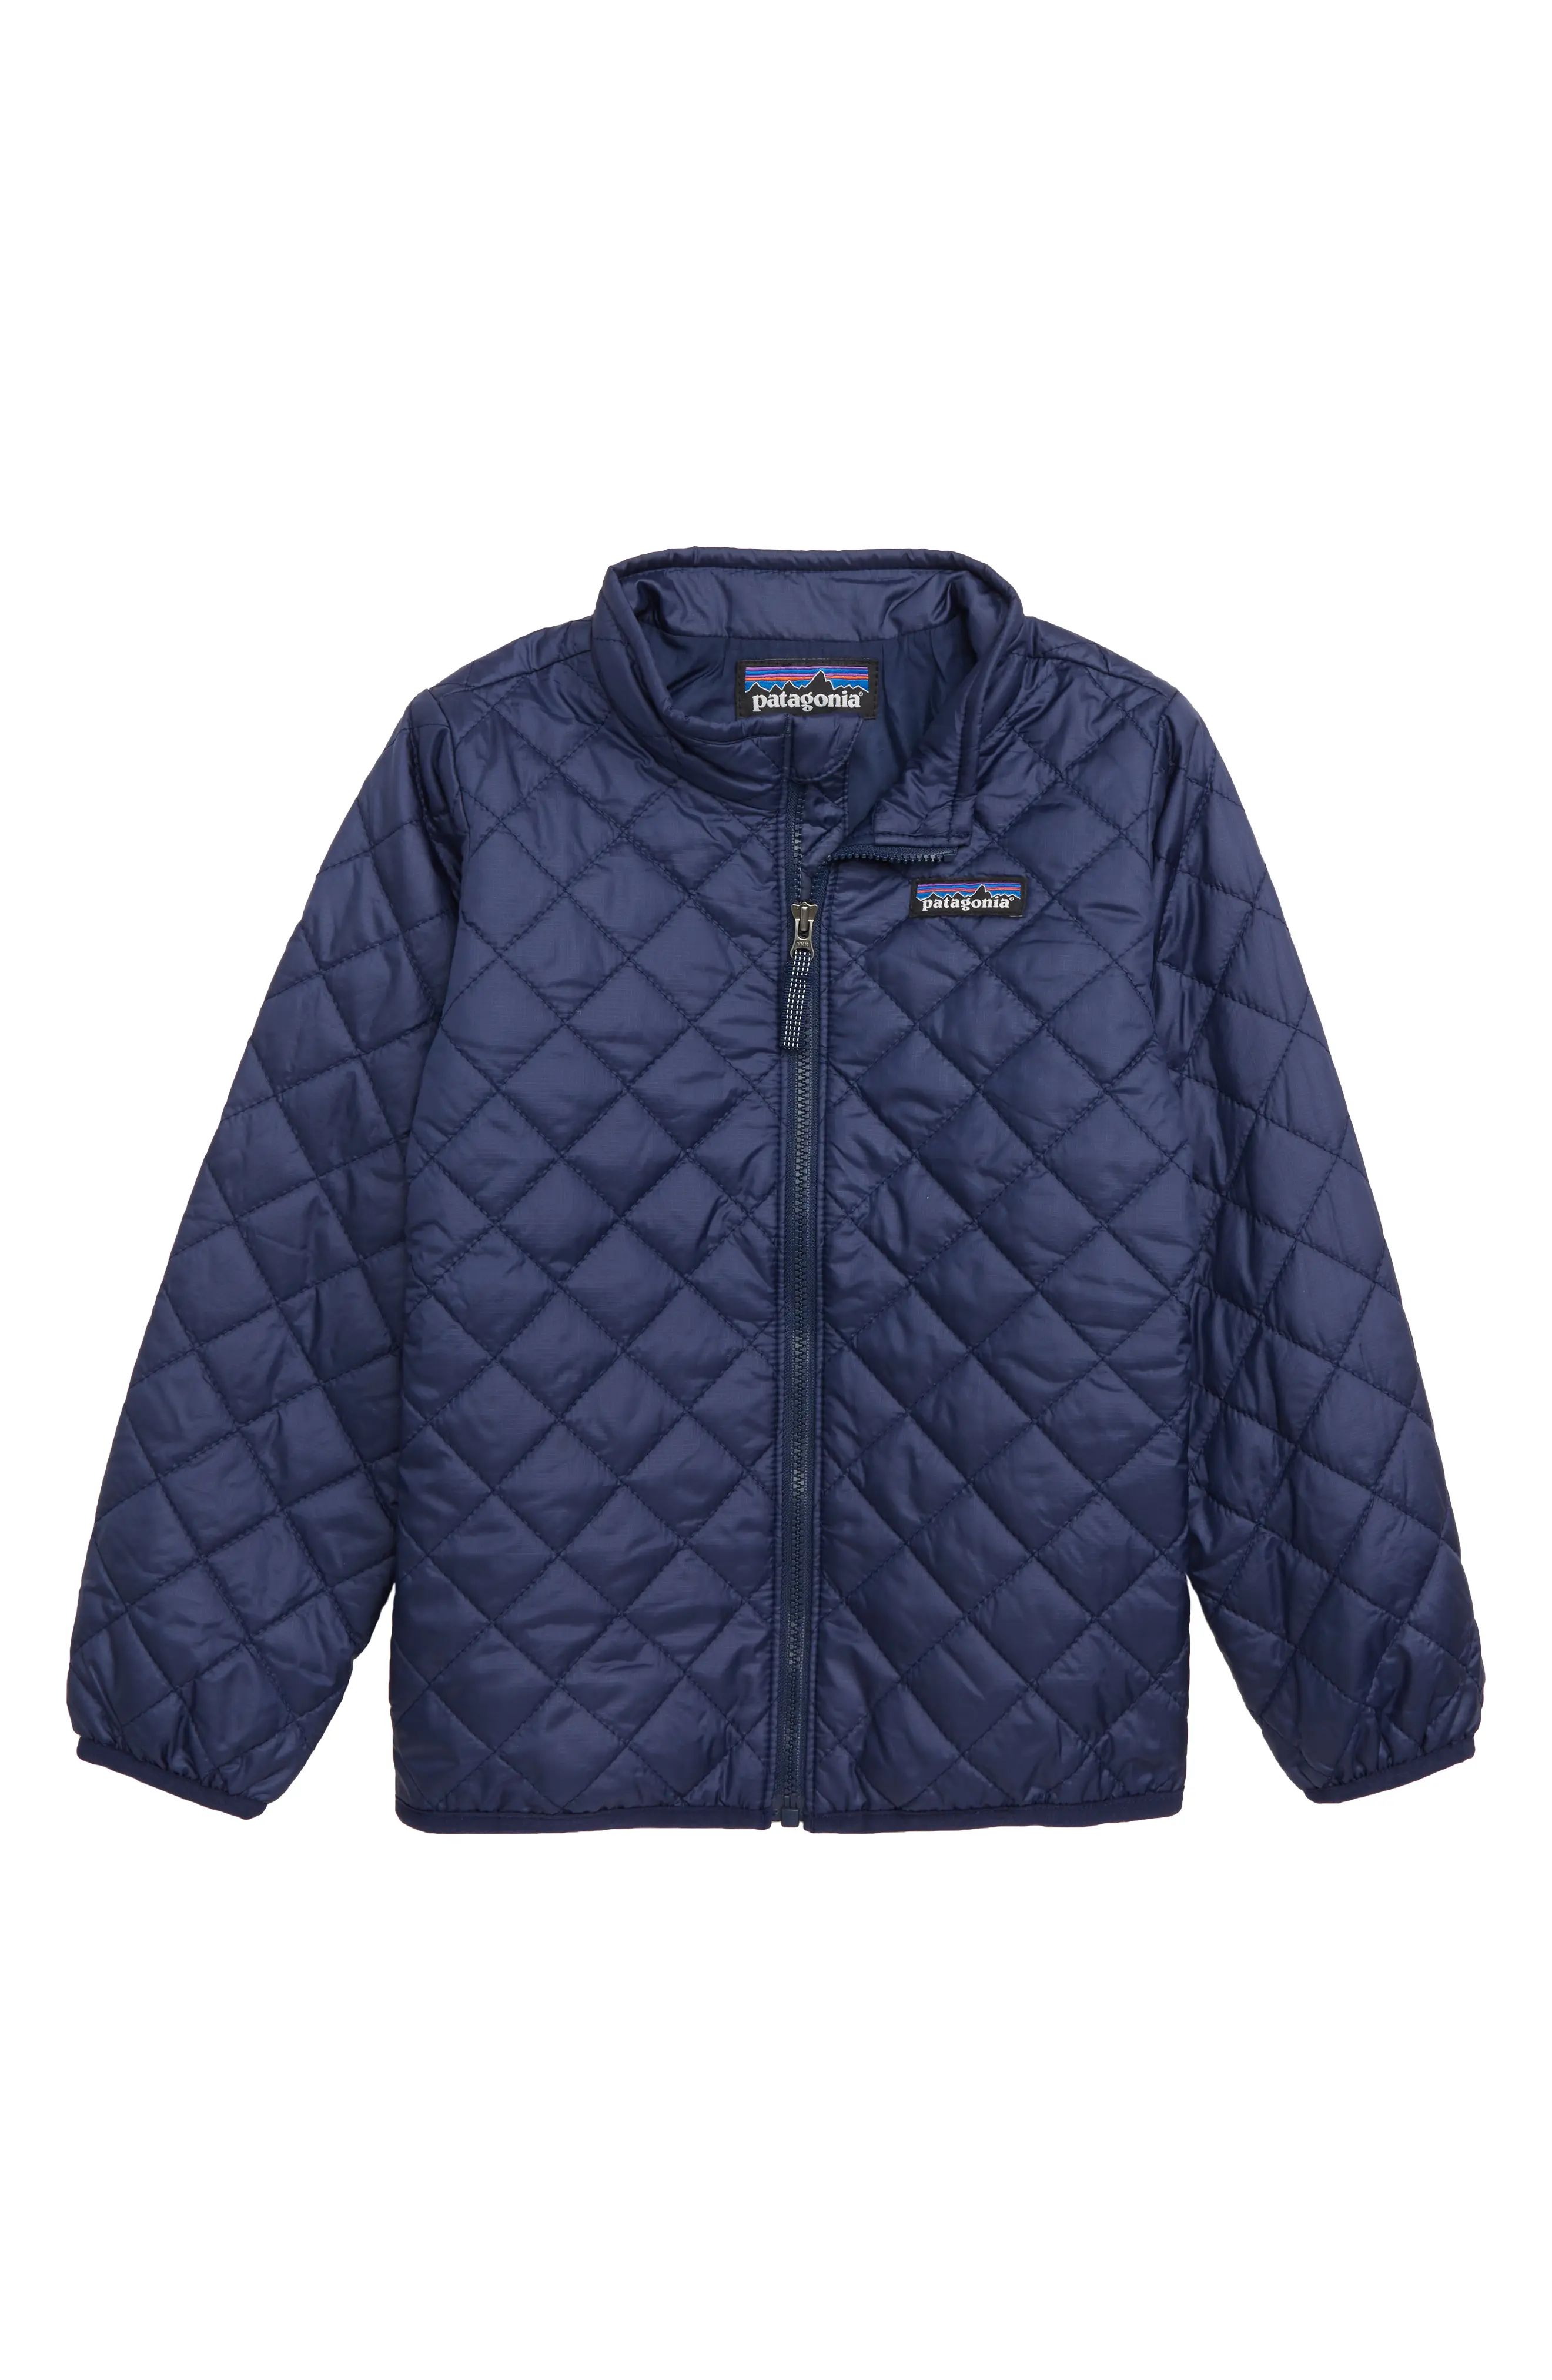 Toddler Boy's Patagonia Nano Puff Quilted Water Resistant Jacket, Size 4T - Blue | Nordstrom